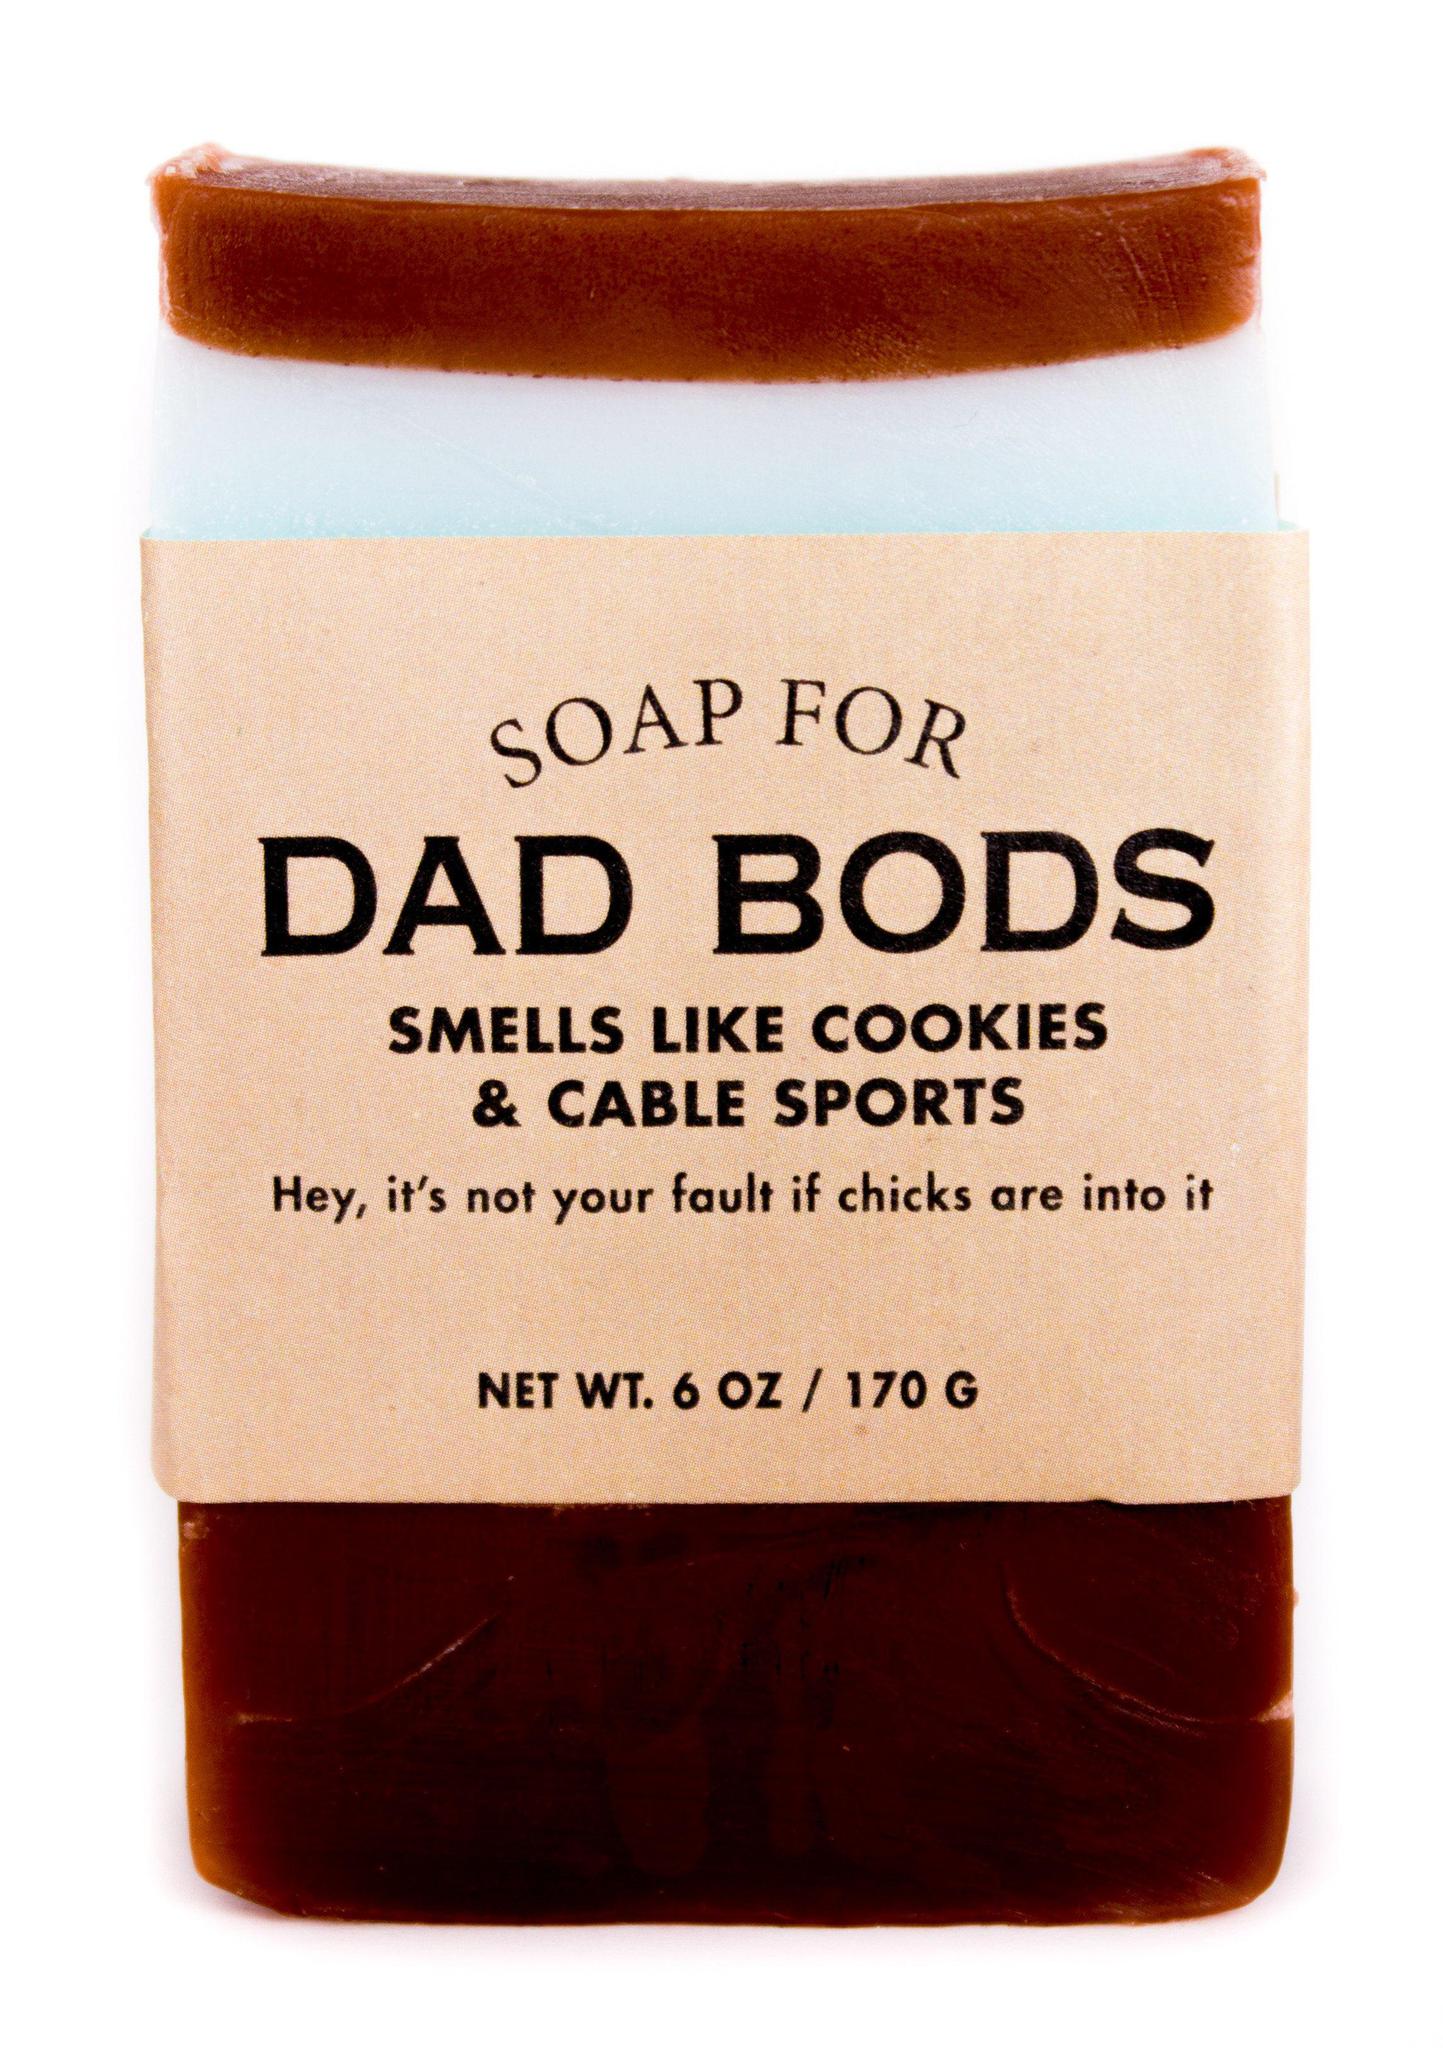 A Soap For Dad Bods